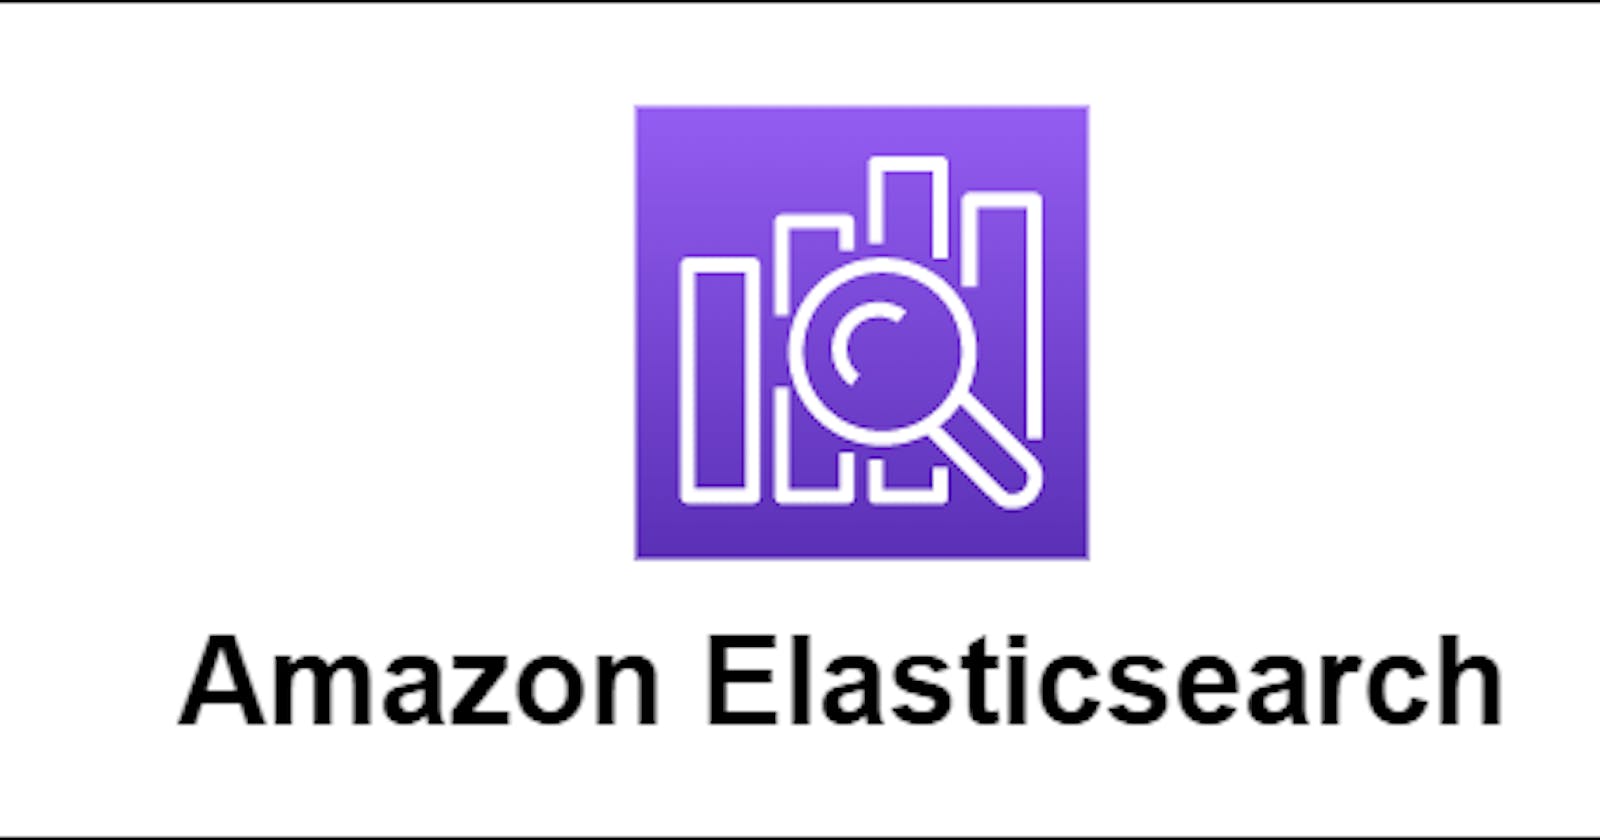 Amazon Elasticsearch In A Nutshell And Things I Learnt The Hard Way